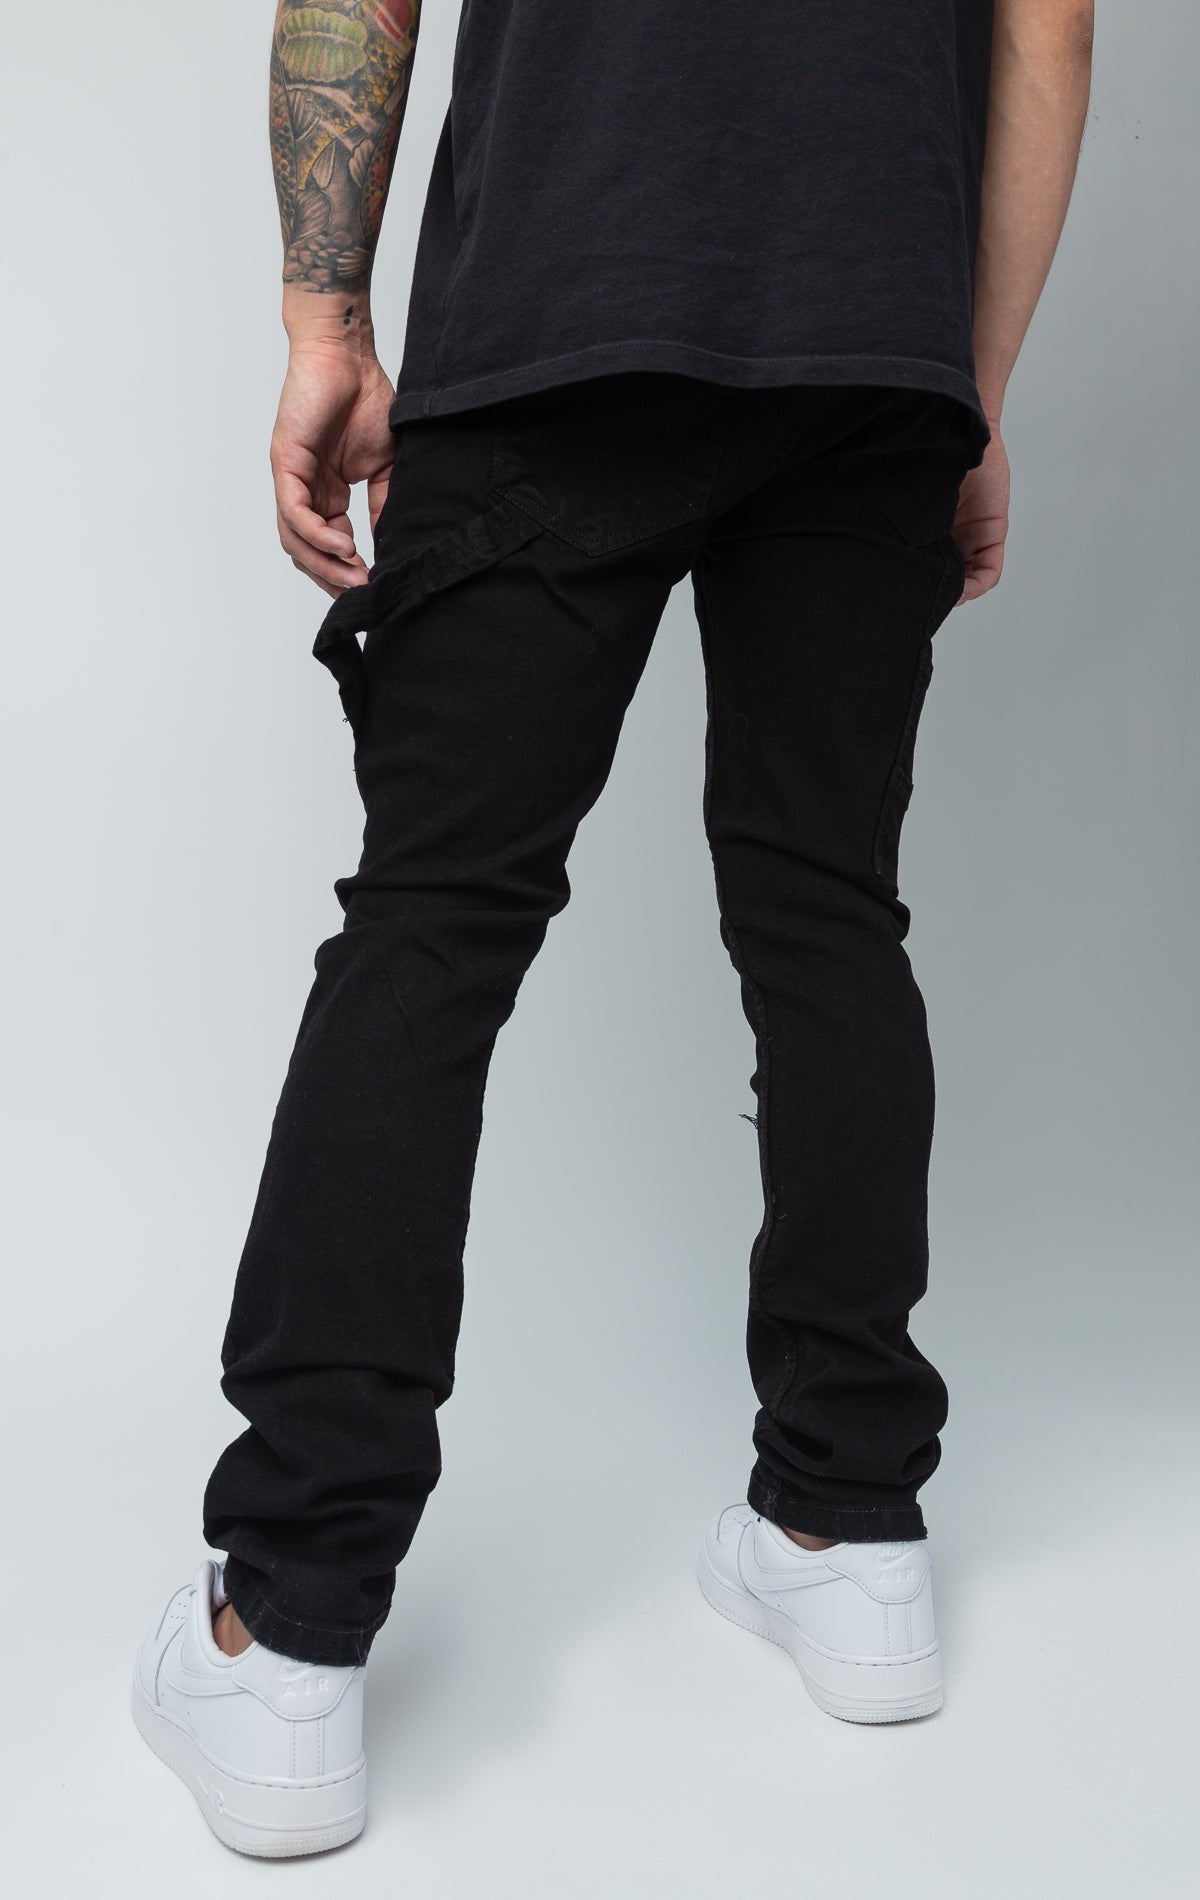 Fixed waist ripped cargo style black jeans.